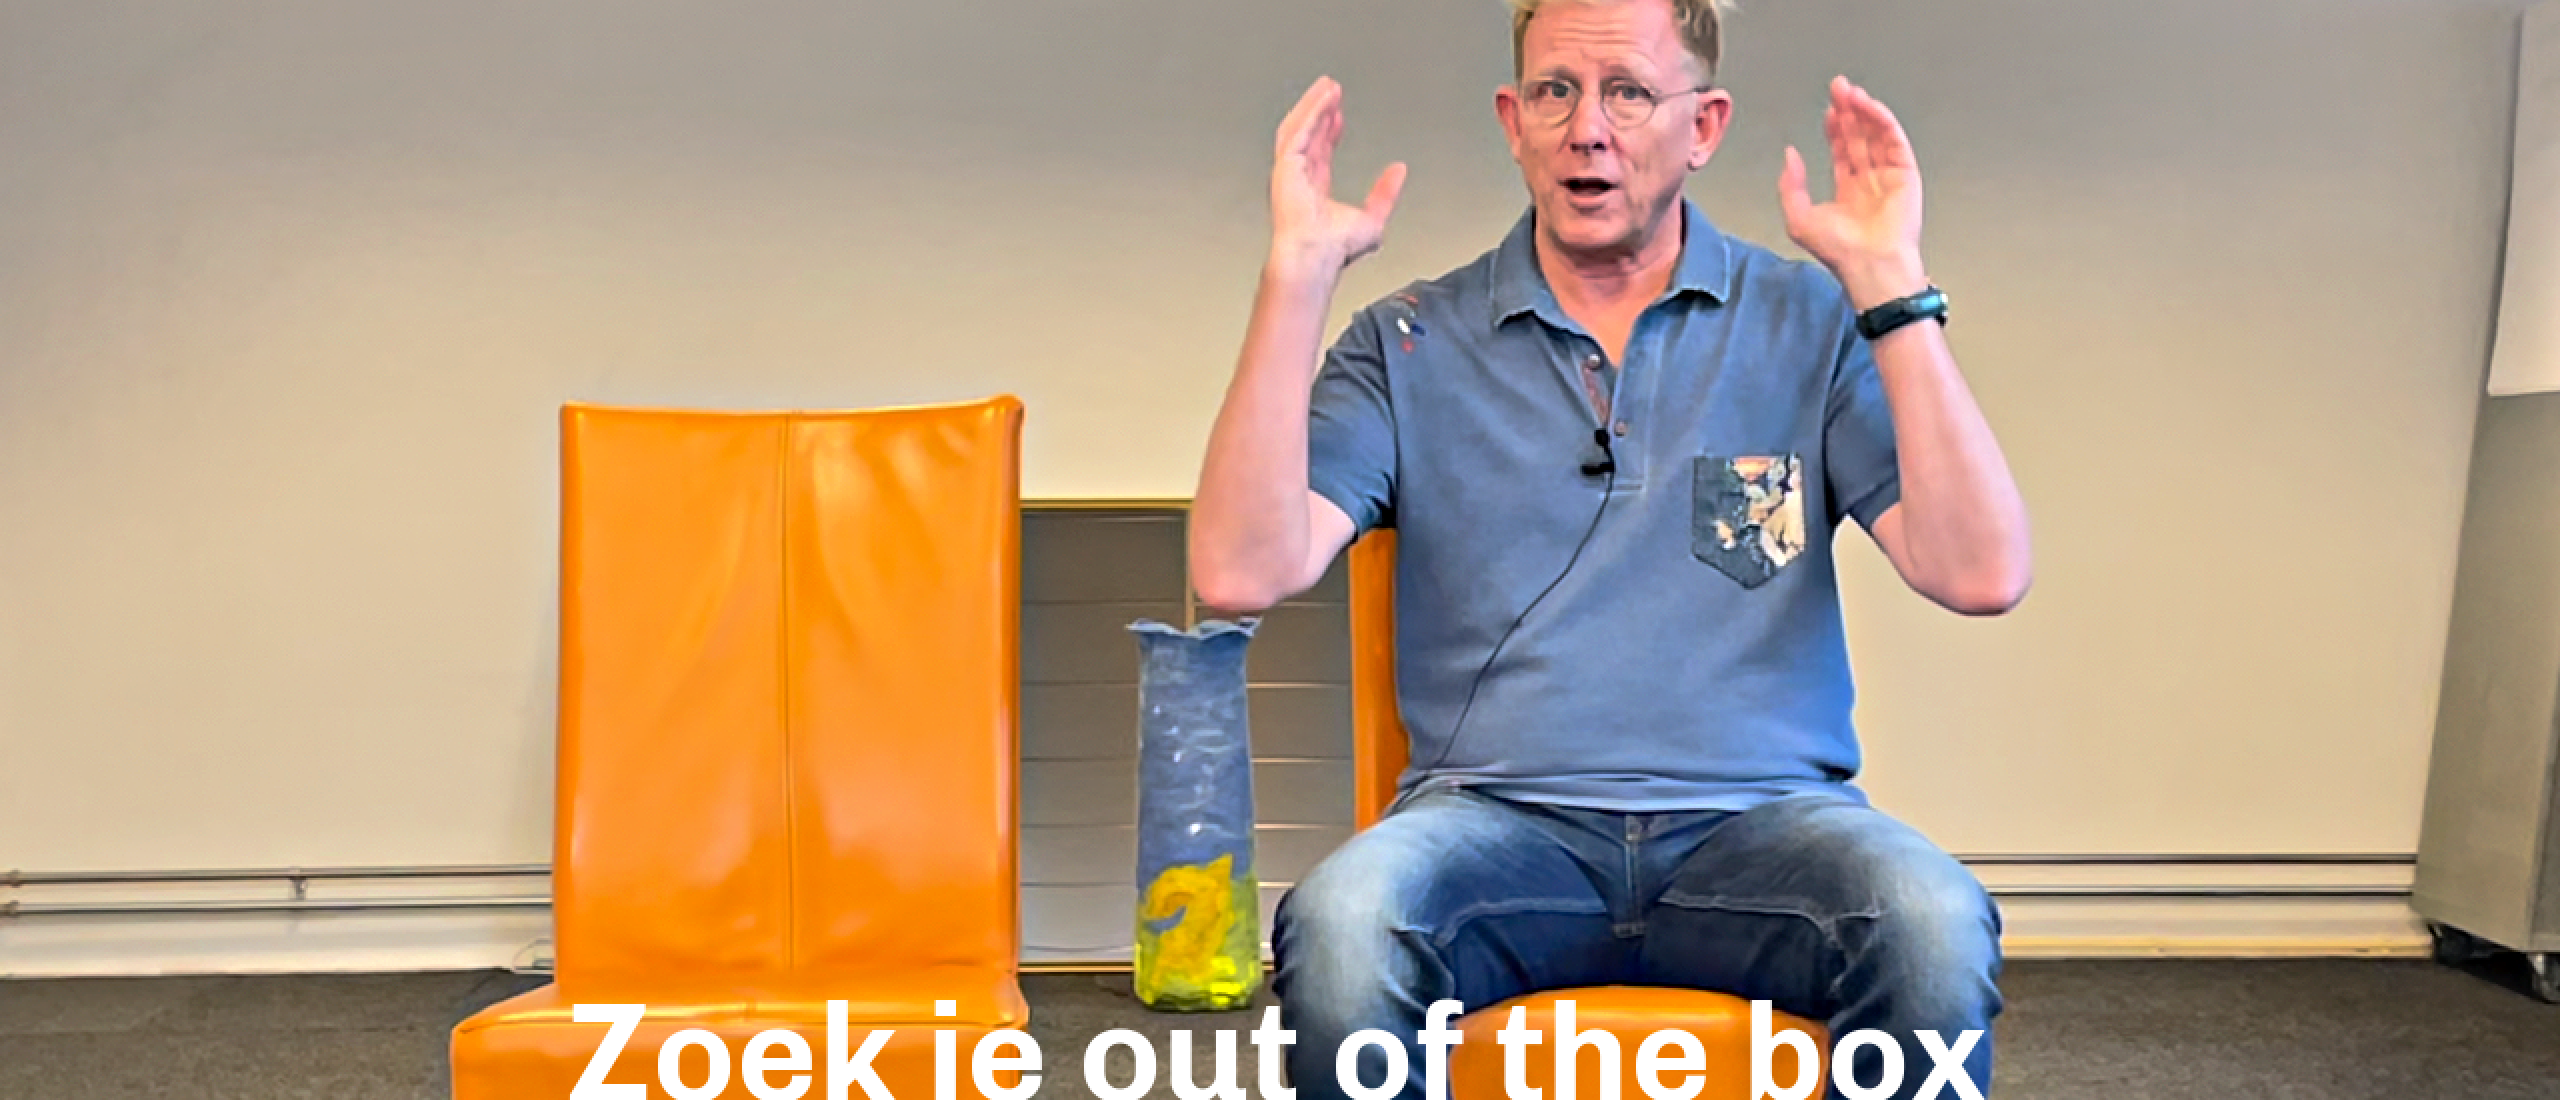 Zoek je out of the box loopbaanbegeleiding in Friesland?